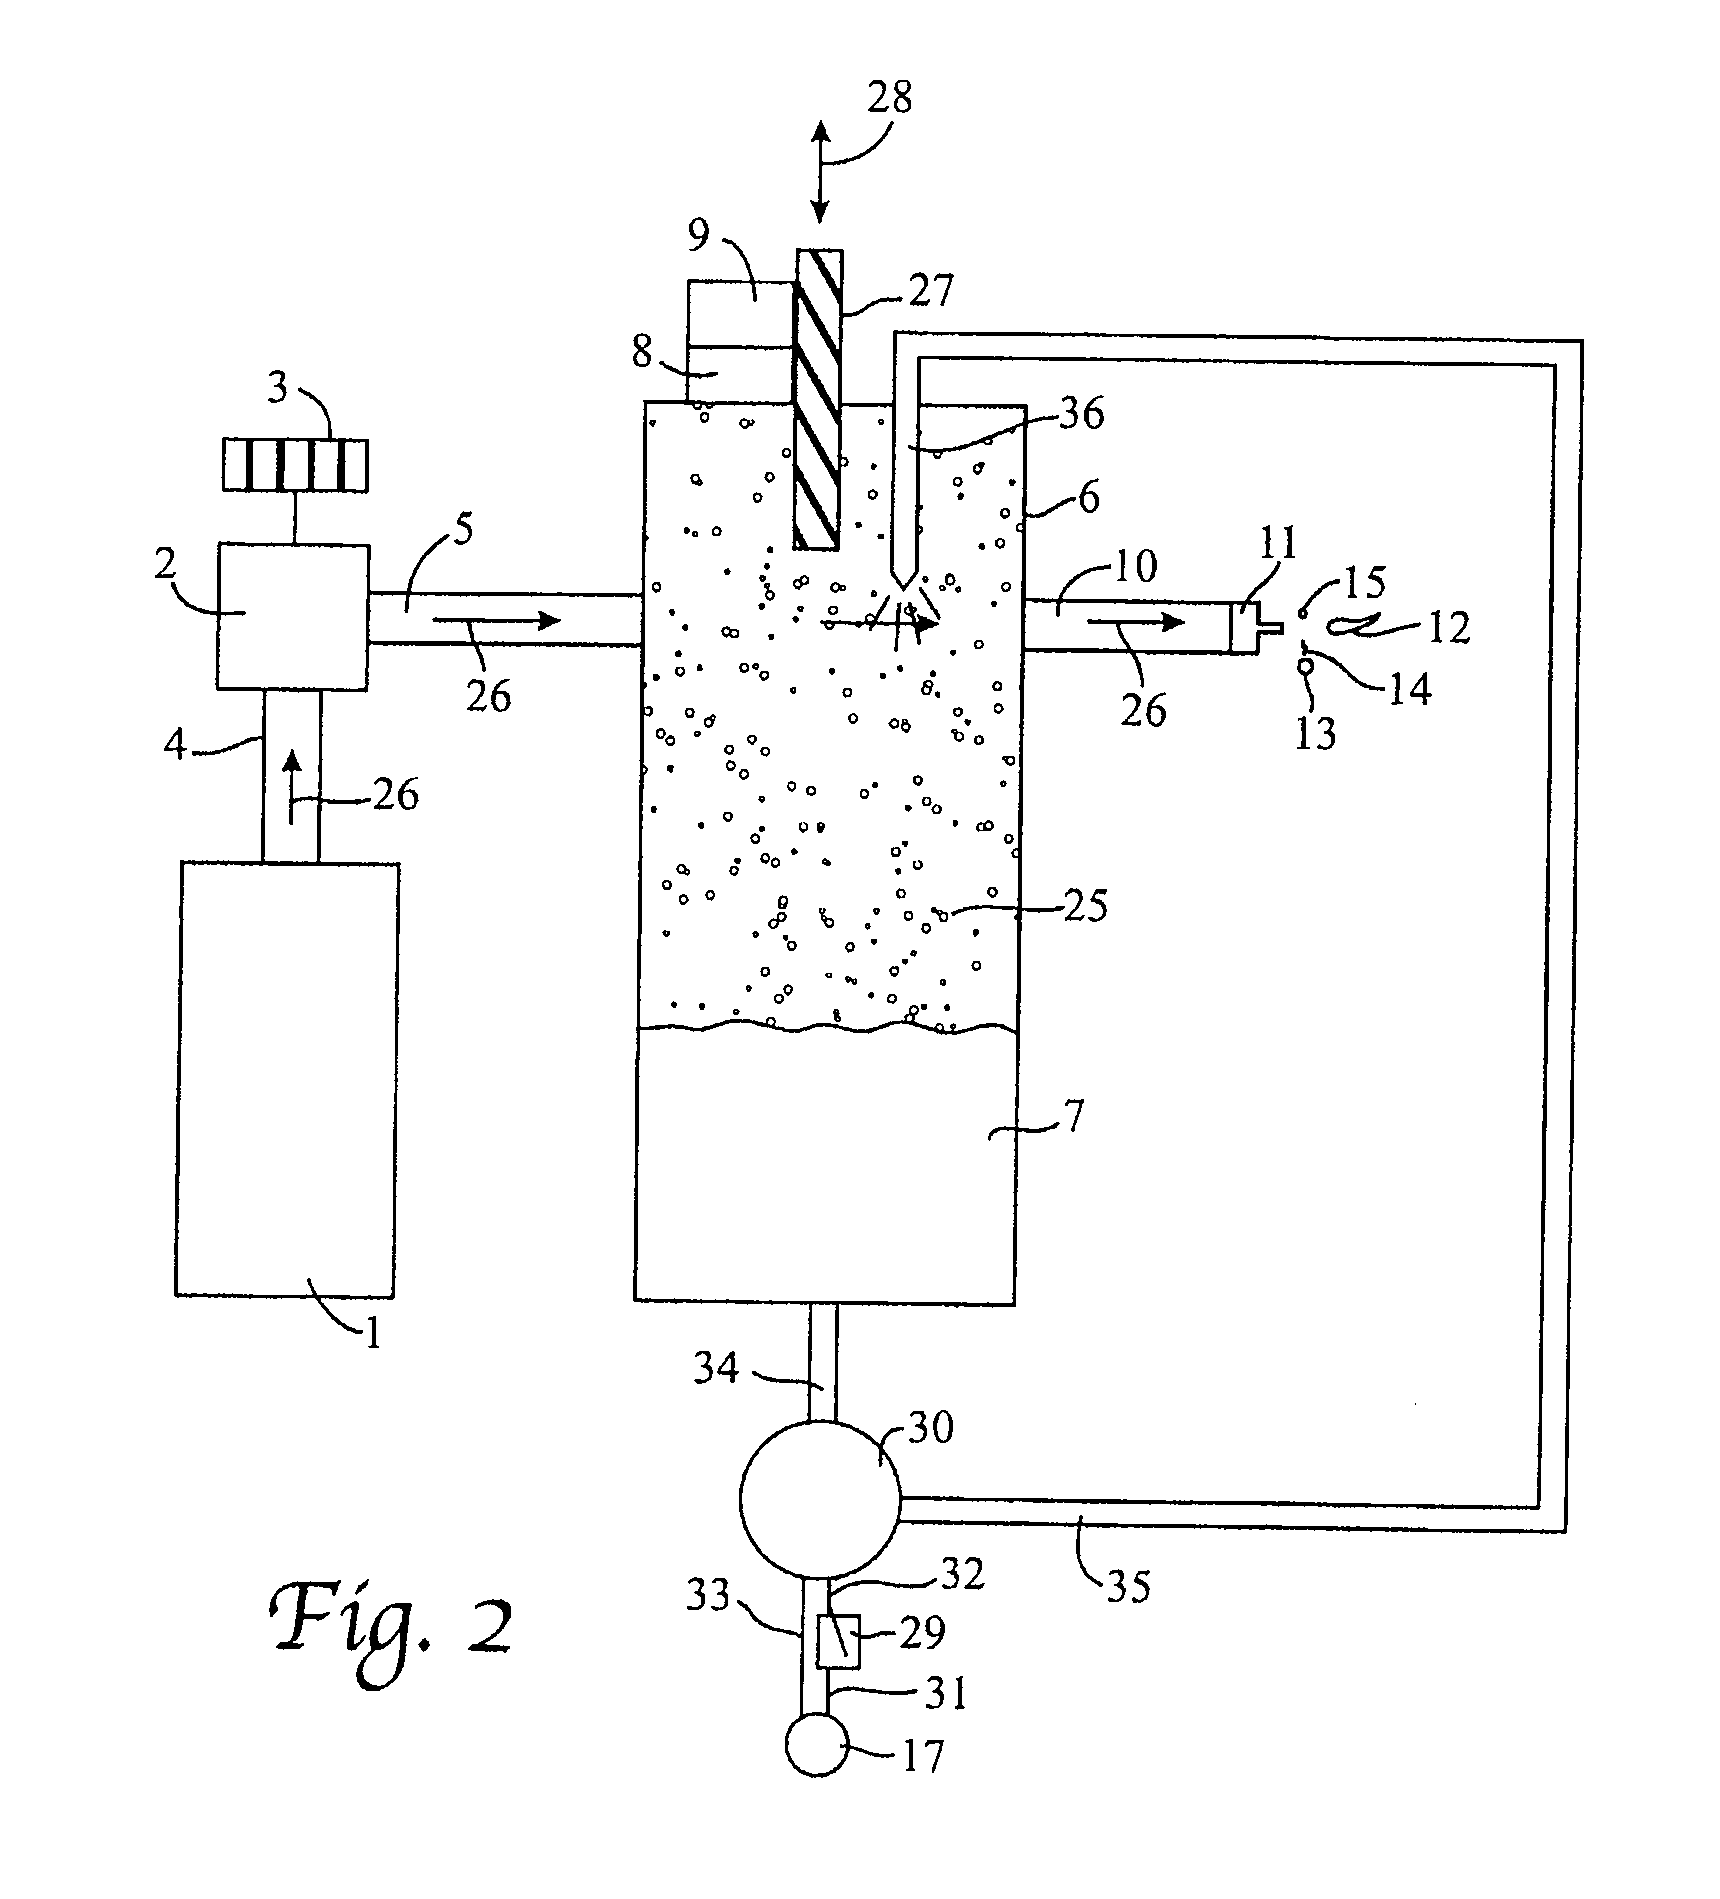 Method and apparatus for producing a visible hydrogen flame